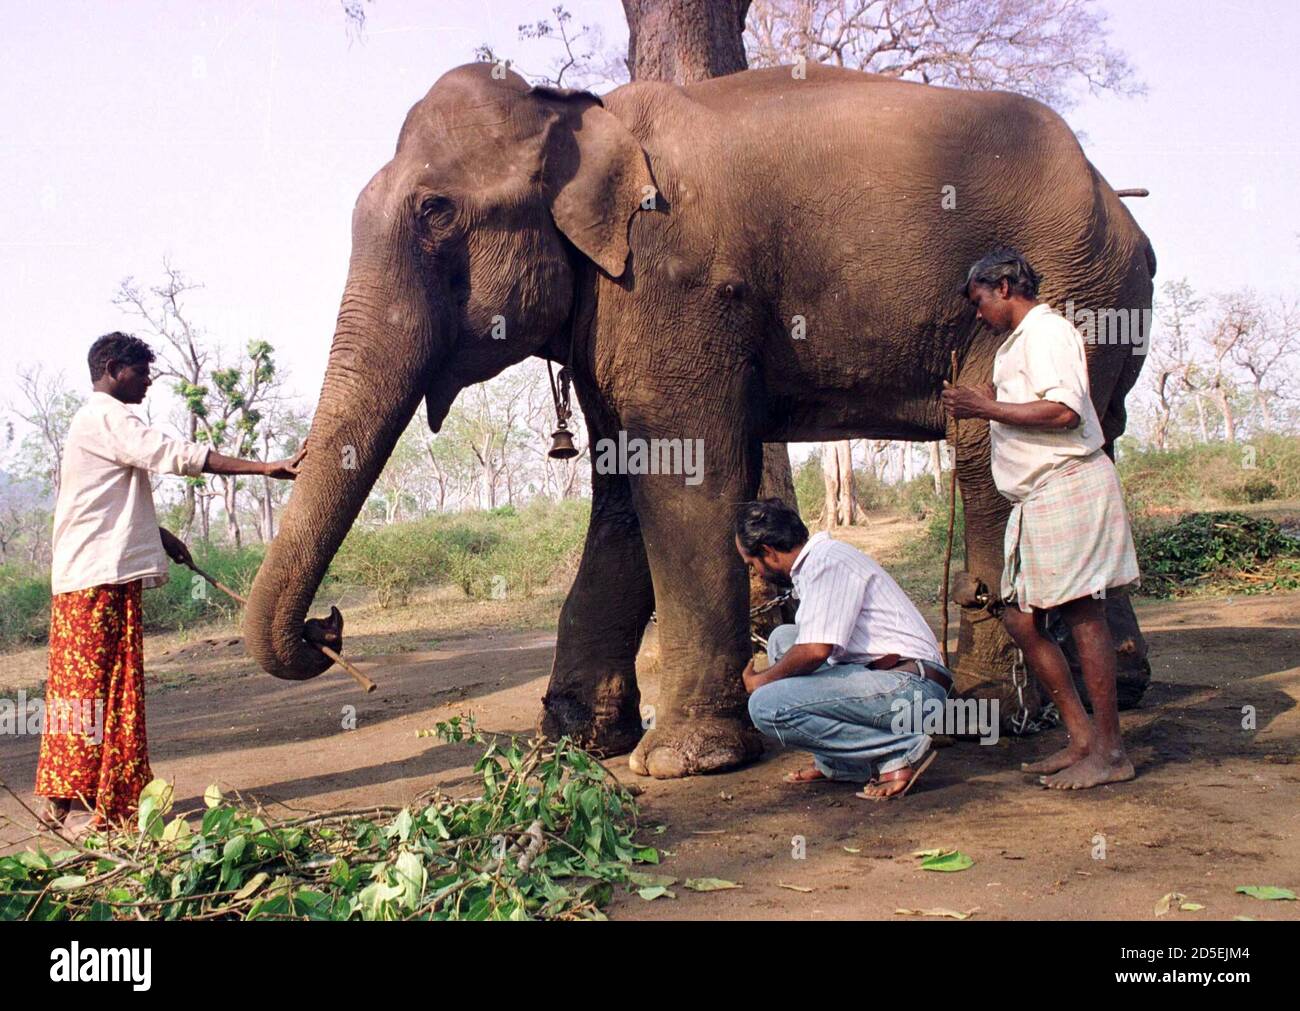 FOR RELEASE WITH STORY BC-INDIA-ELEPHANT - 